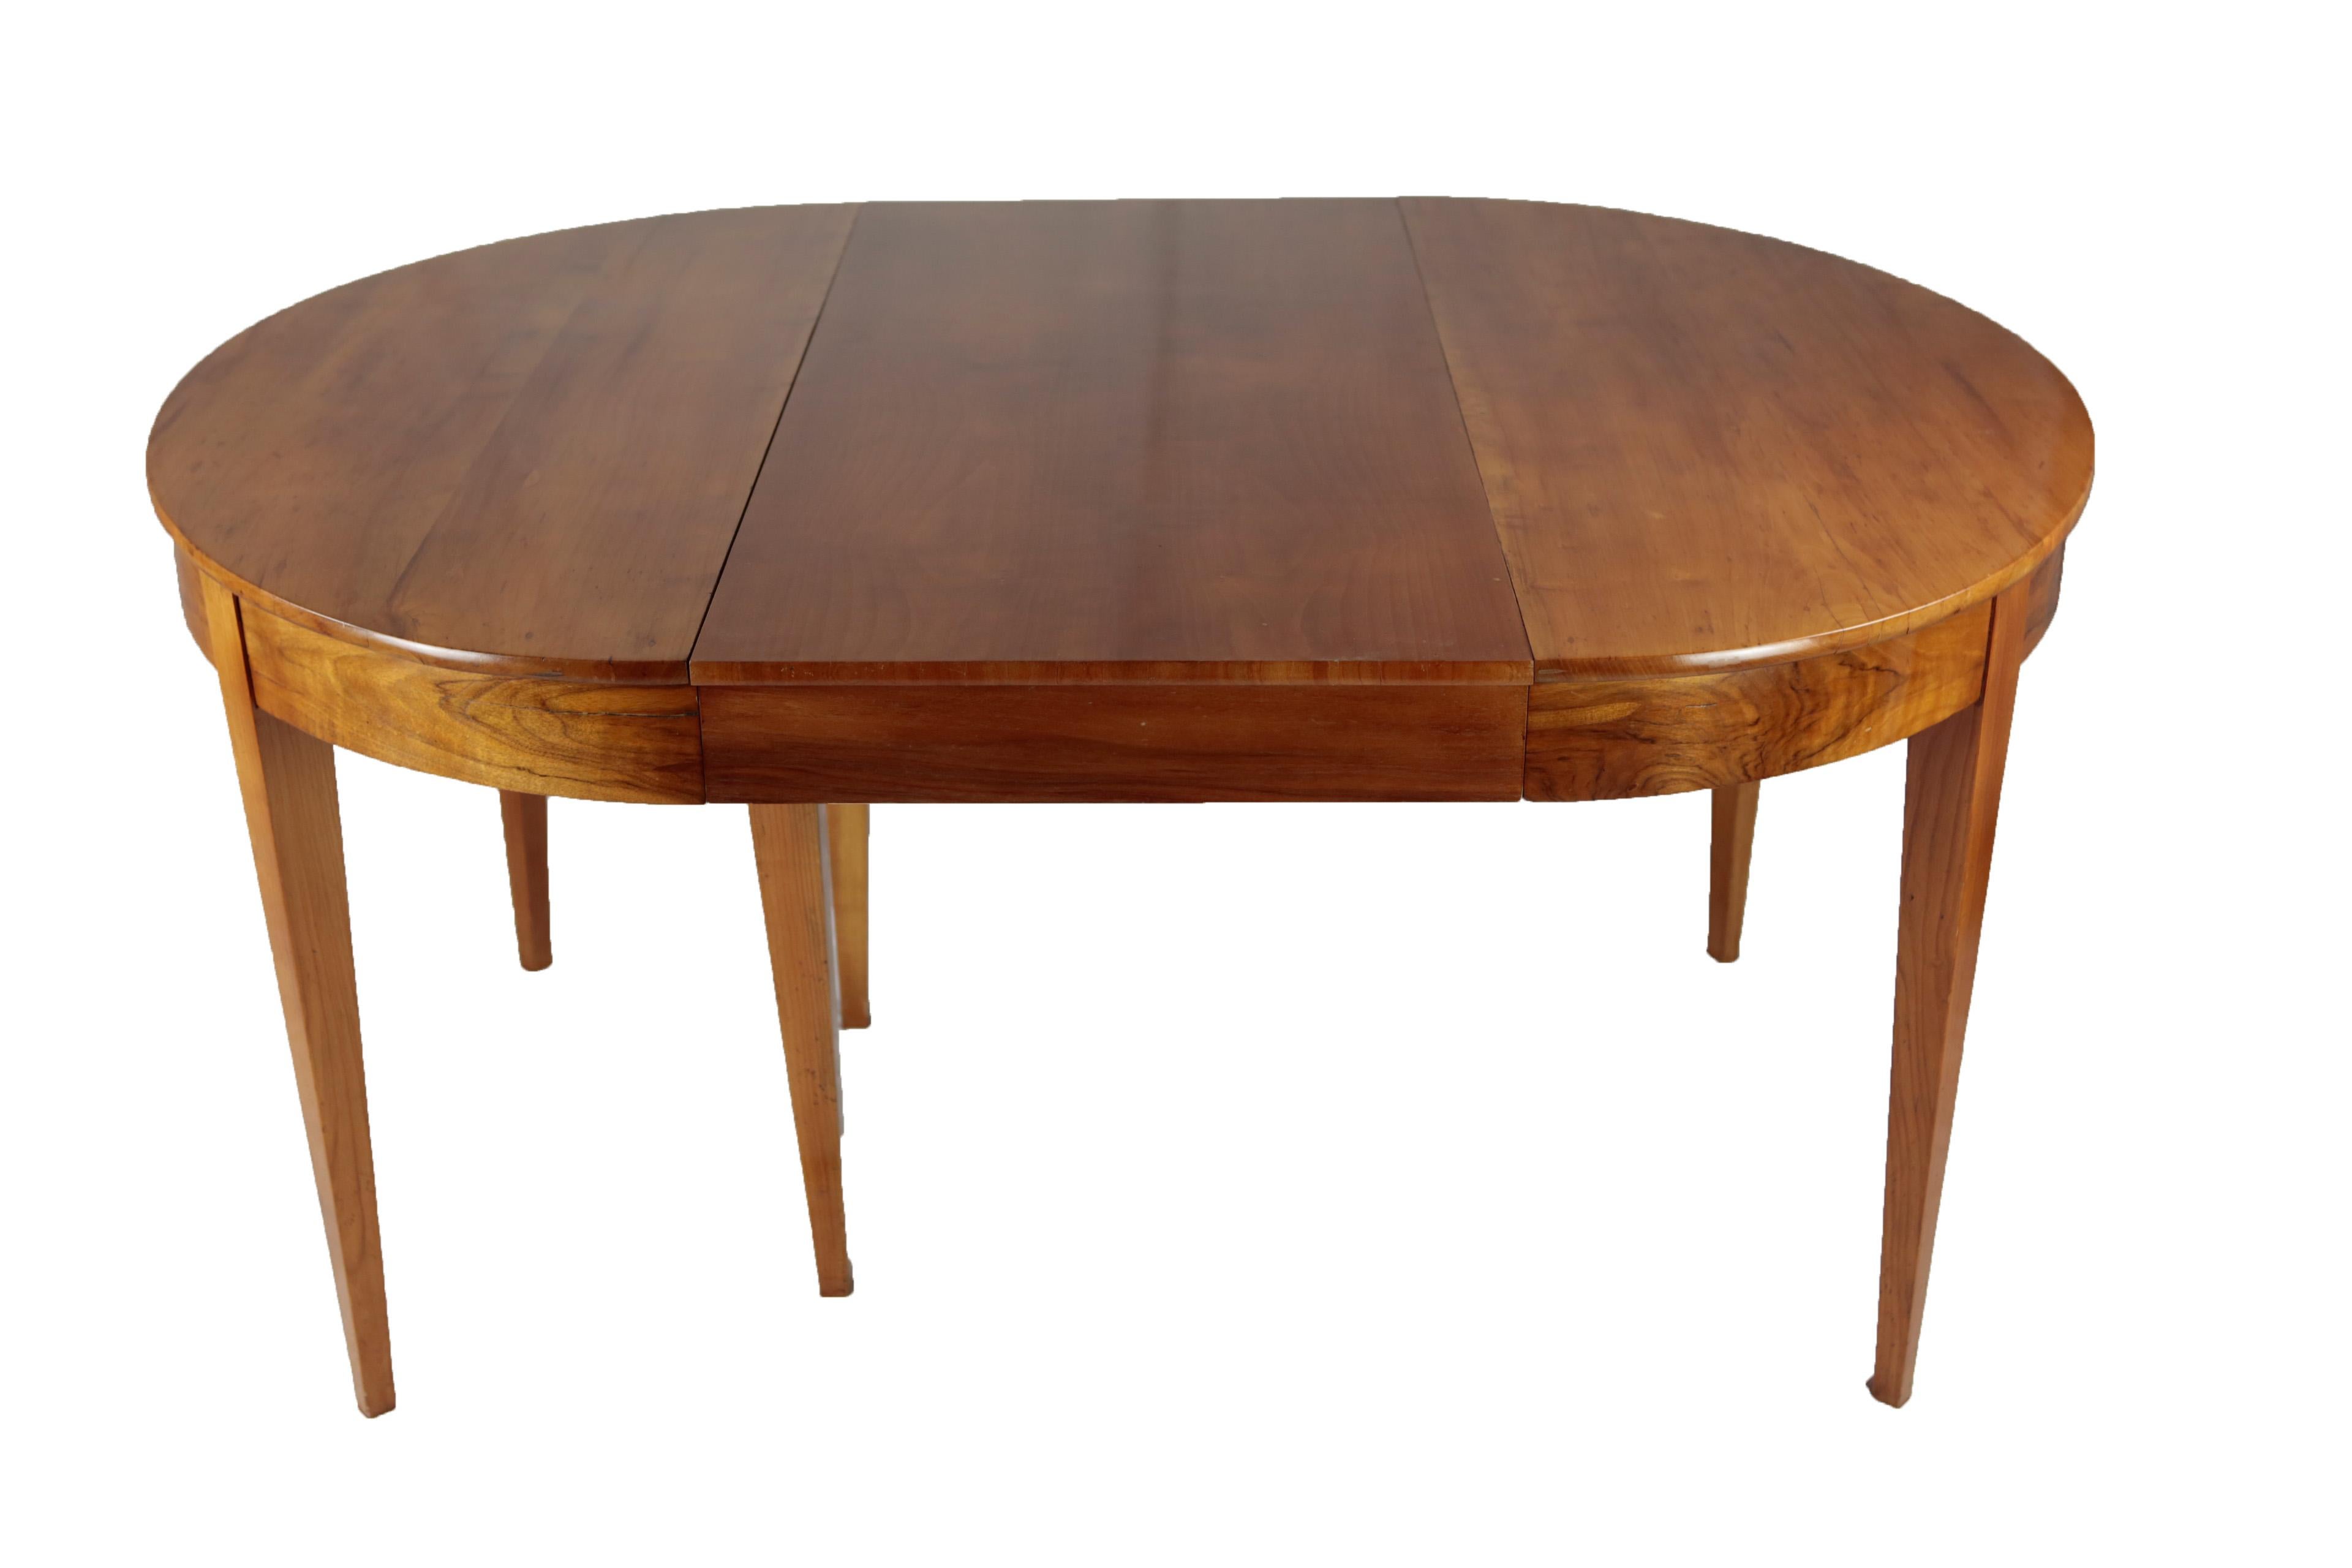 Beautiful and practical Biedermeier period dining table in cherrywood veneer and nutwood. The round table has a diameter of 104 cm and comes with 3 inlay plates (added later, because the original ones got lost), The inlay plates have a depth of 55.5